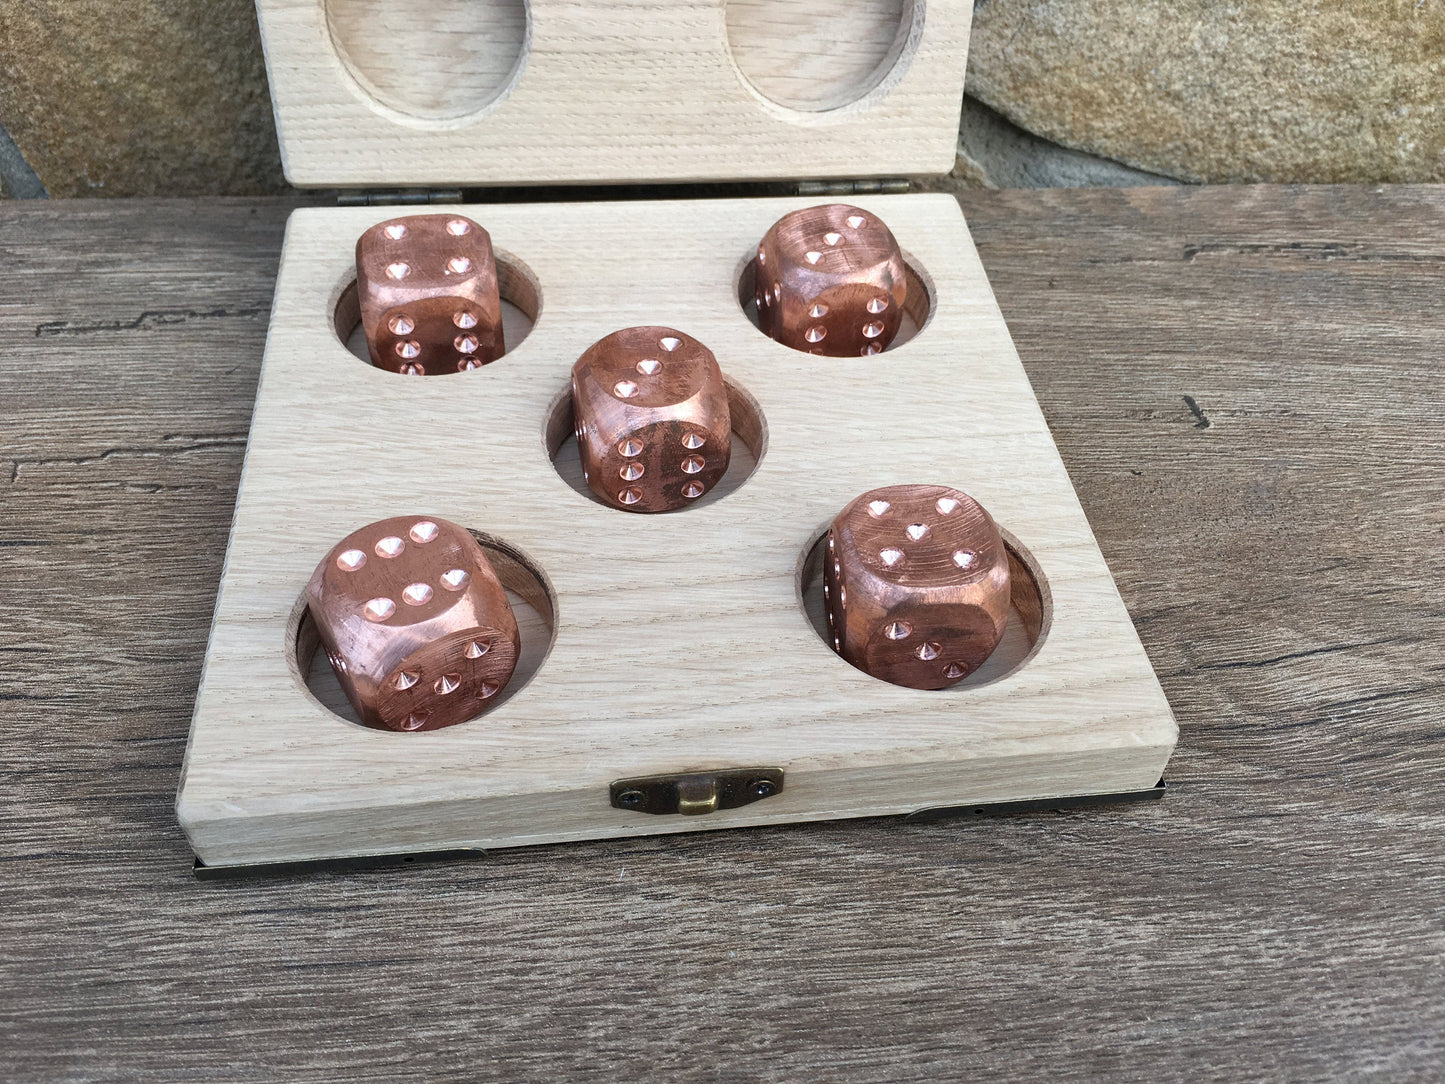 Yahtzee dice, yahtzee, yardzee, yardzee dice, copper dices, yahtzee game,yahtzee gift, copper wedding, copper anniversary gift, copper gifts